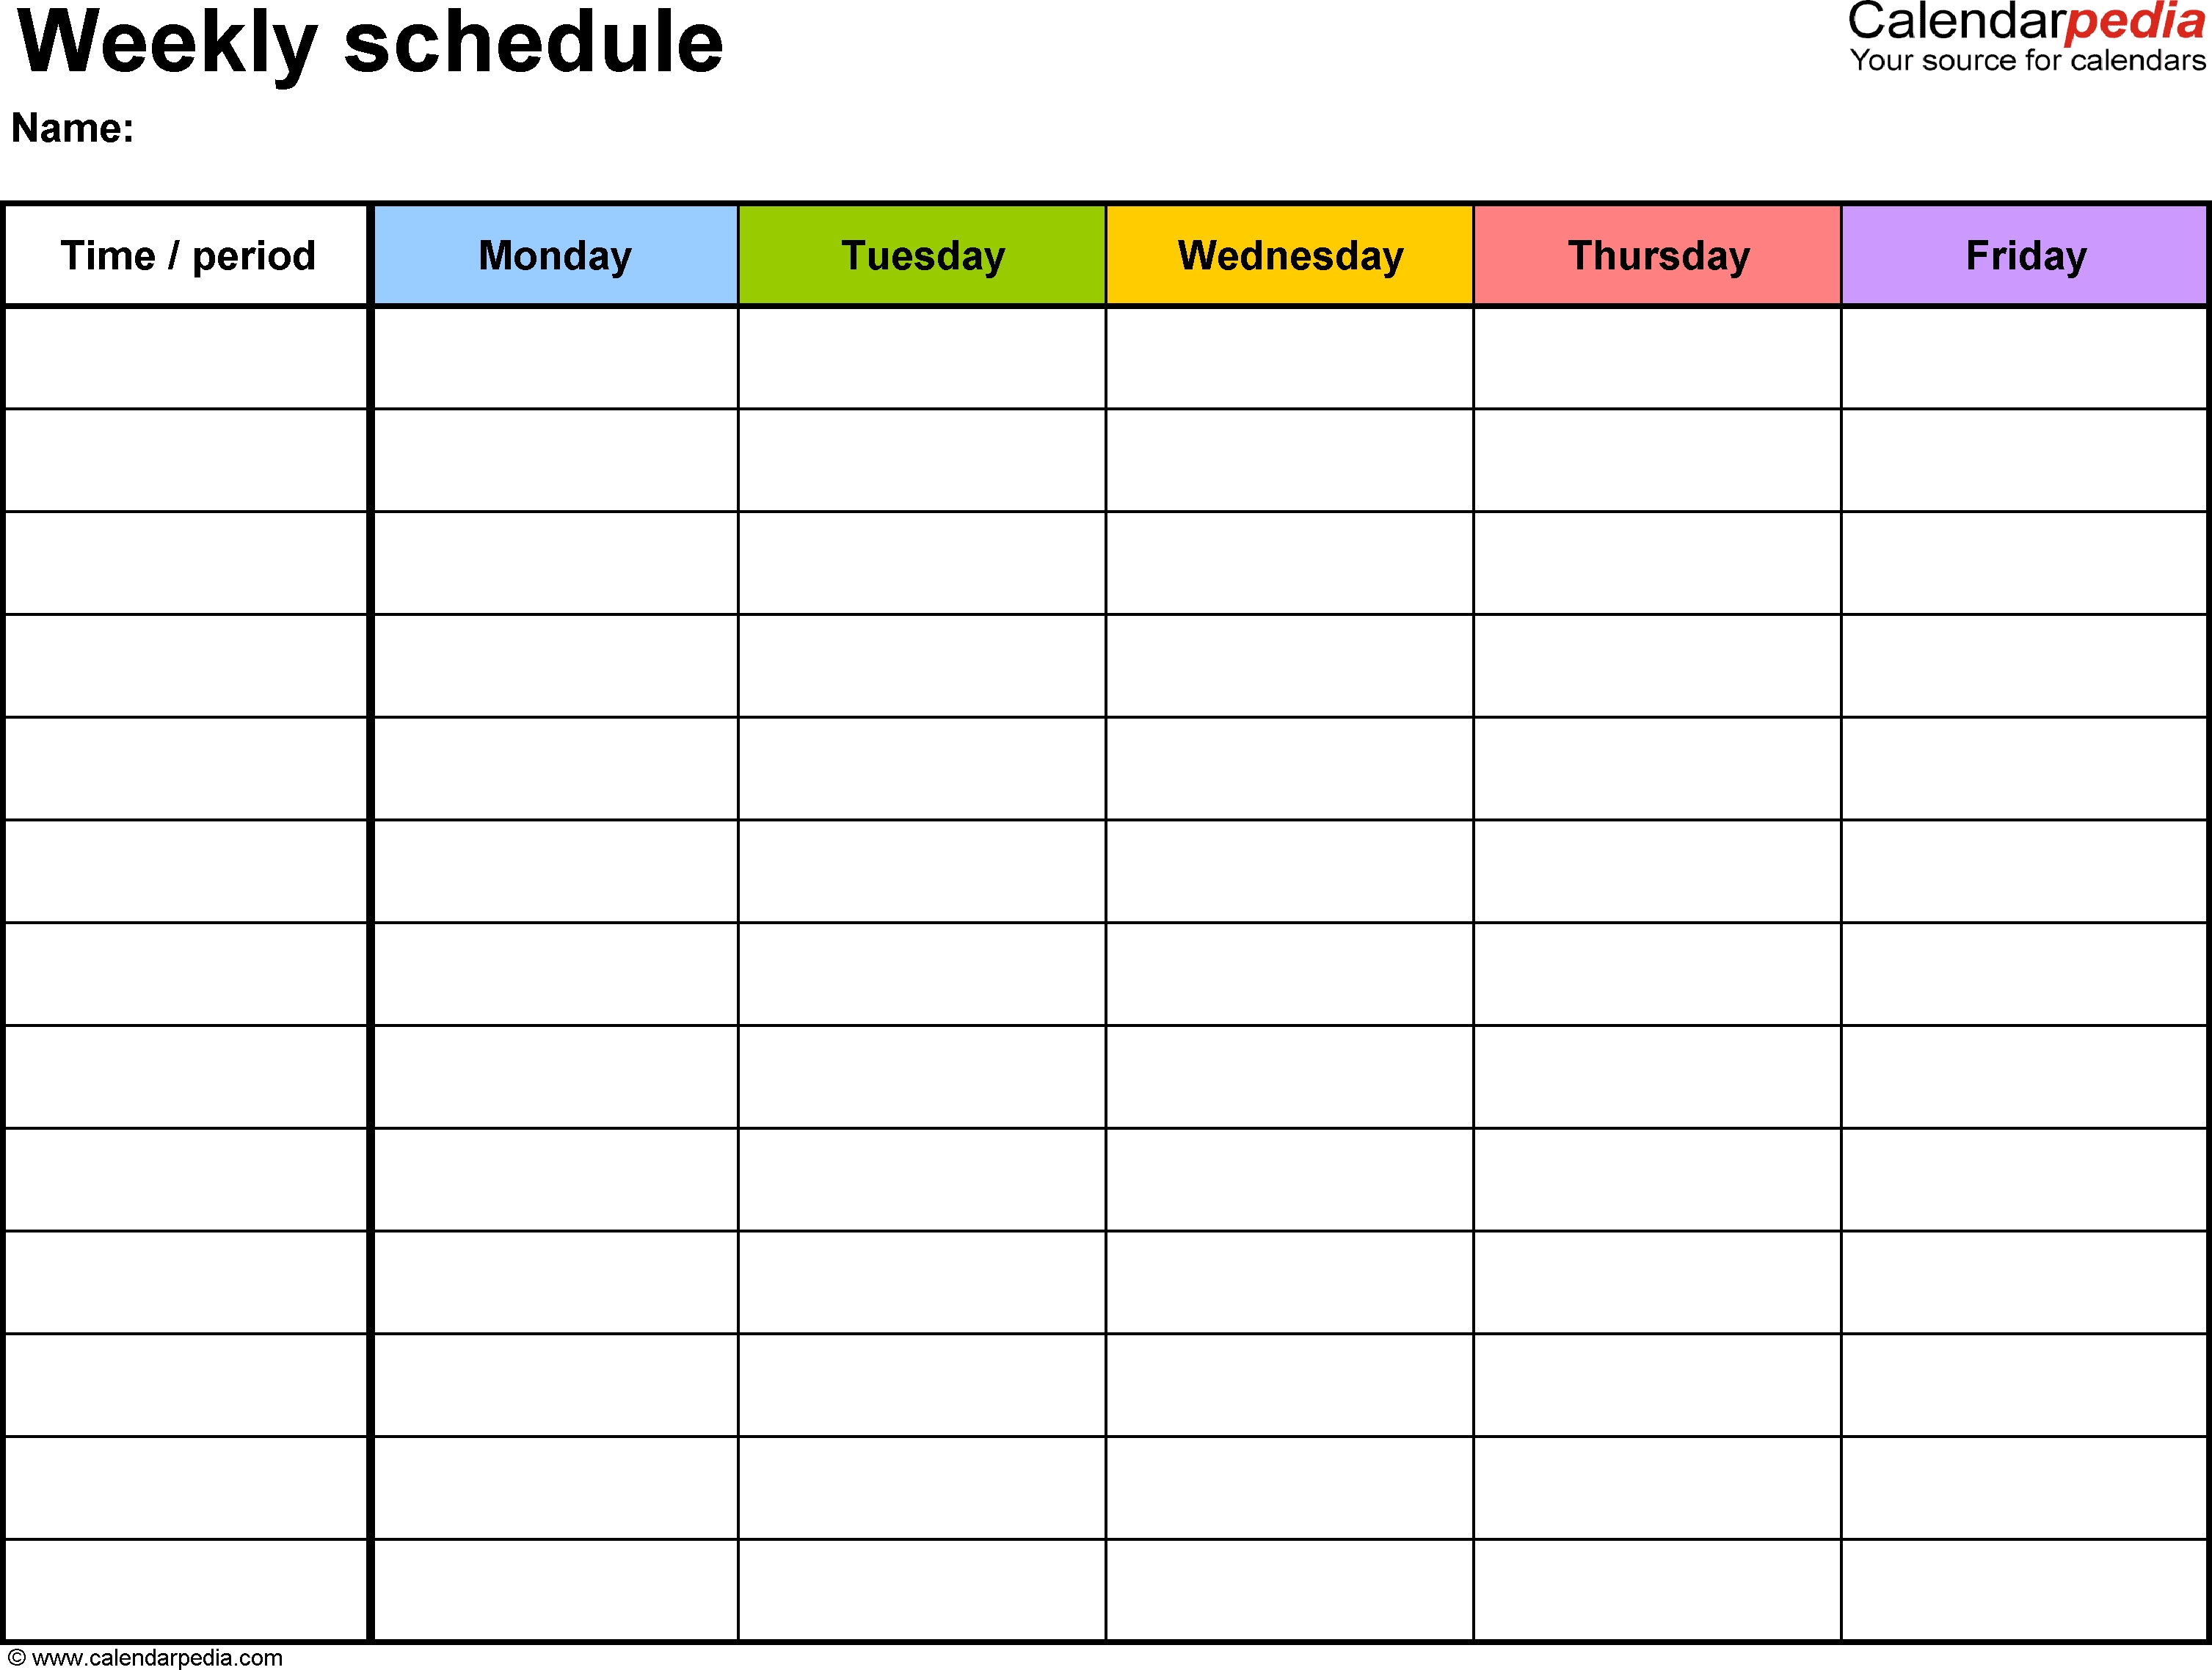 Free Weekly Schedule Templates For Word - 18 Templates with 7 Day Week Blank Calendar